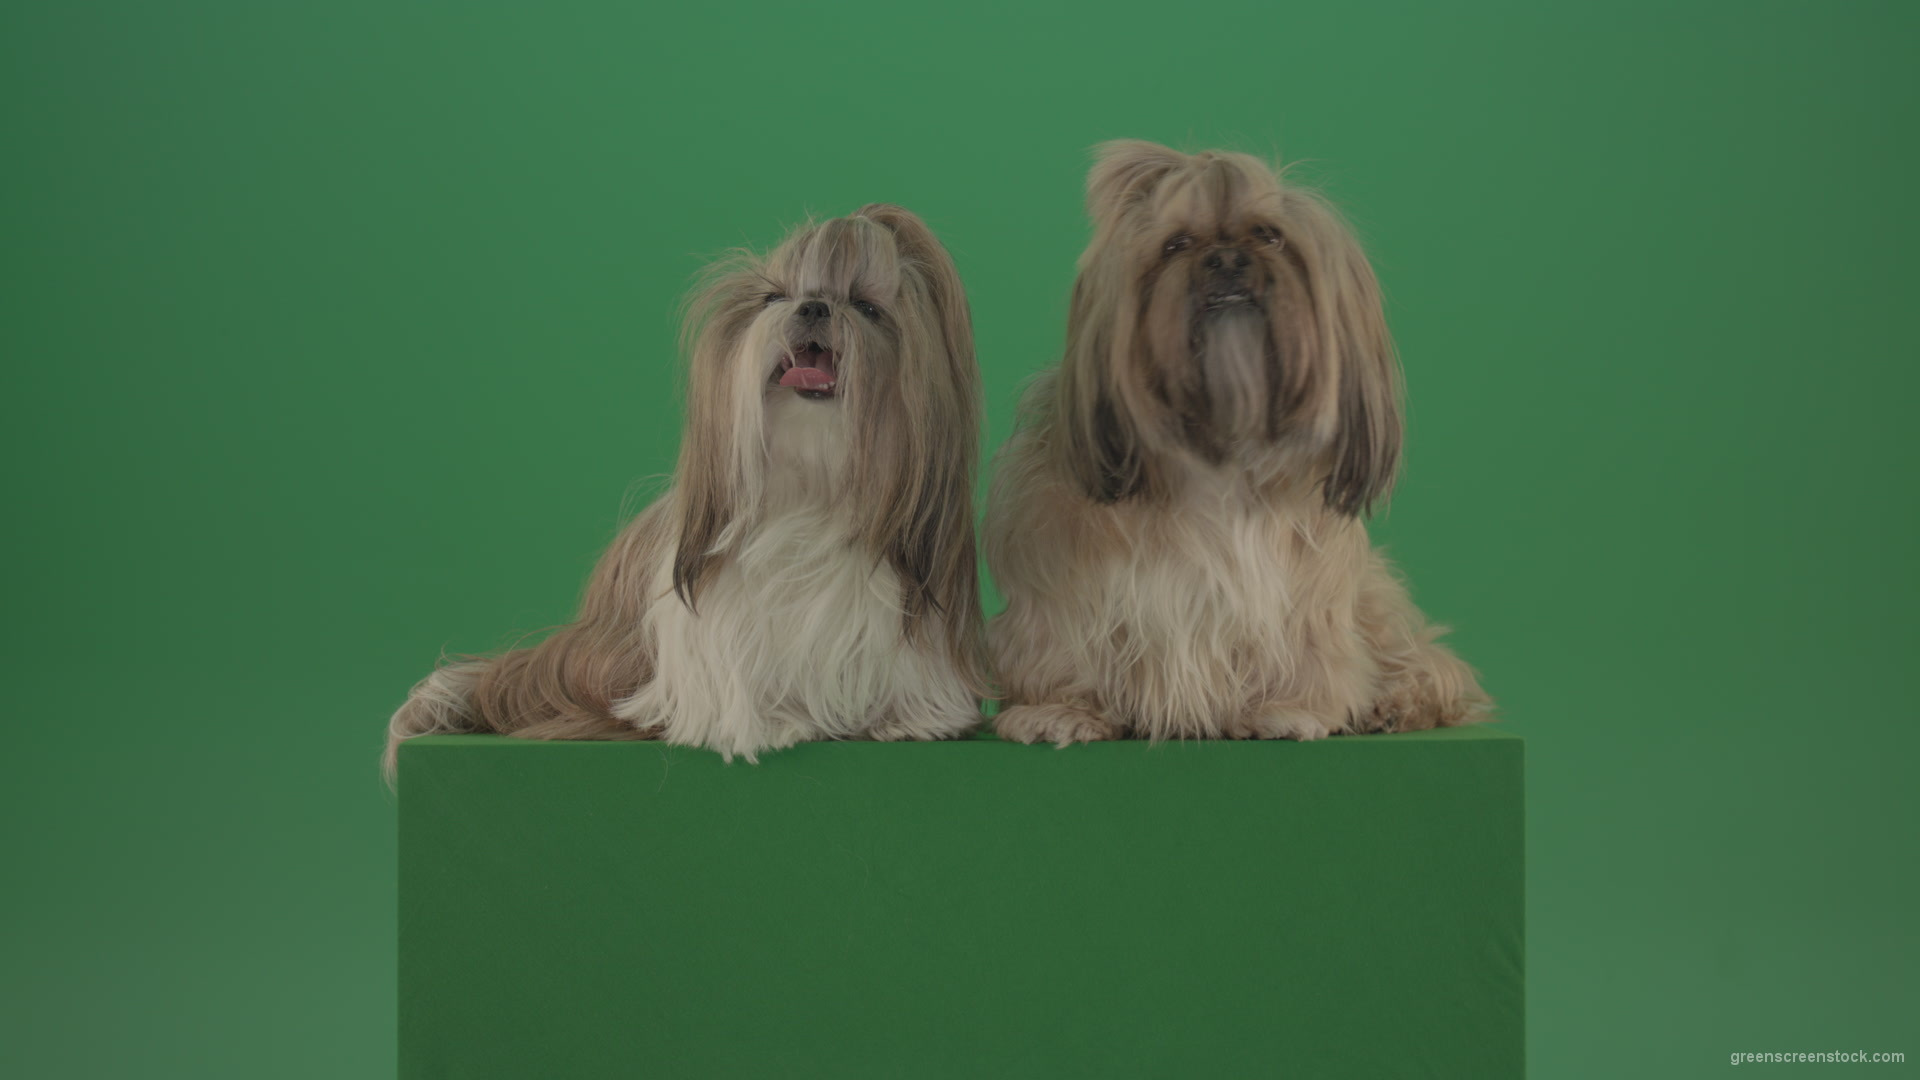 Award-winning-Small-toy-Shihtzu-Dogs-isolated-on-green-screen_008 Green Screen Stock